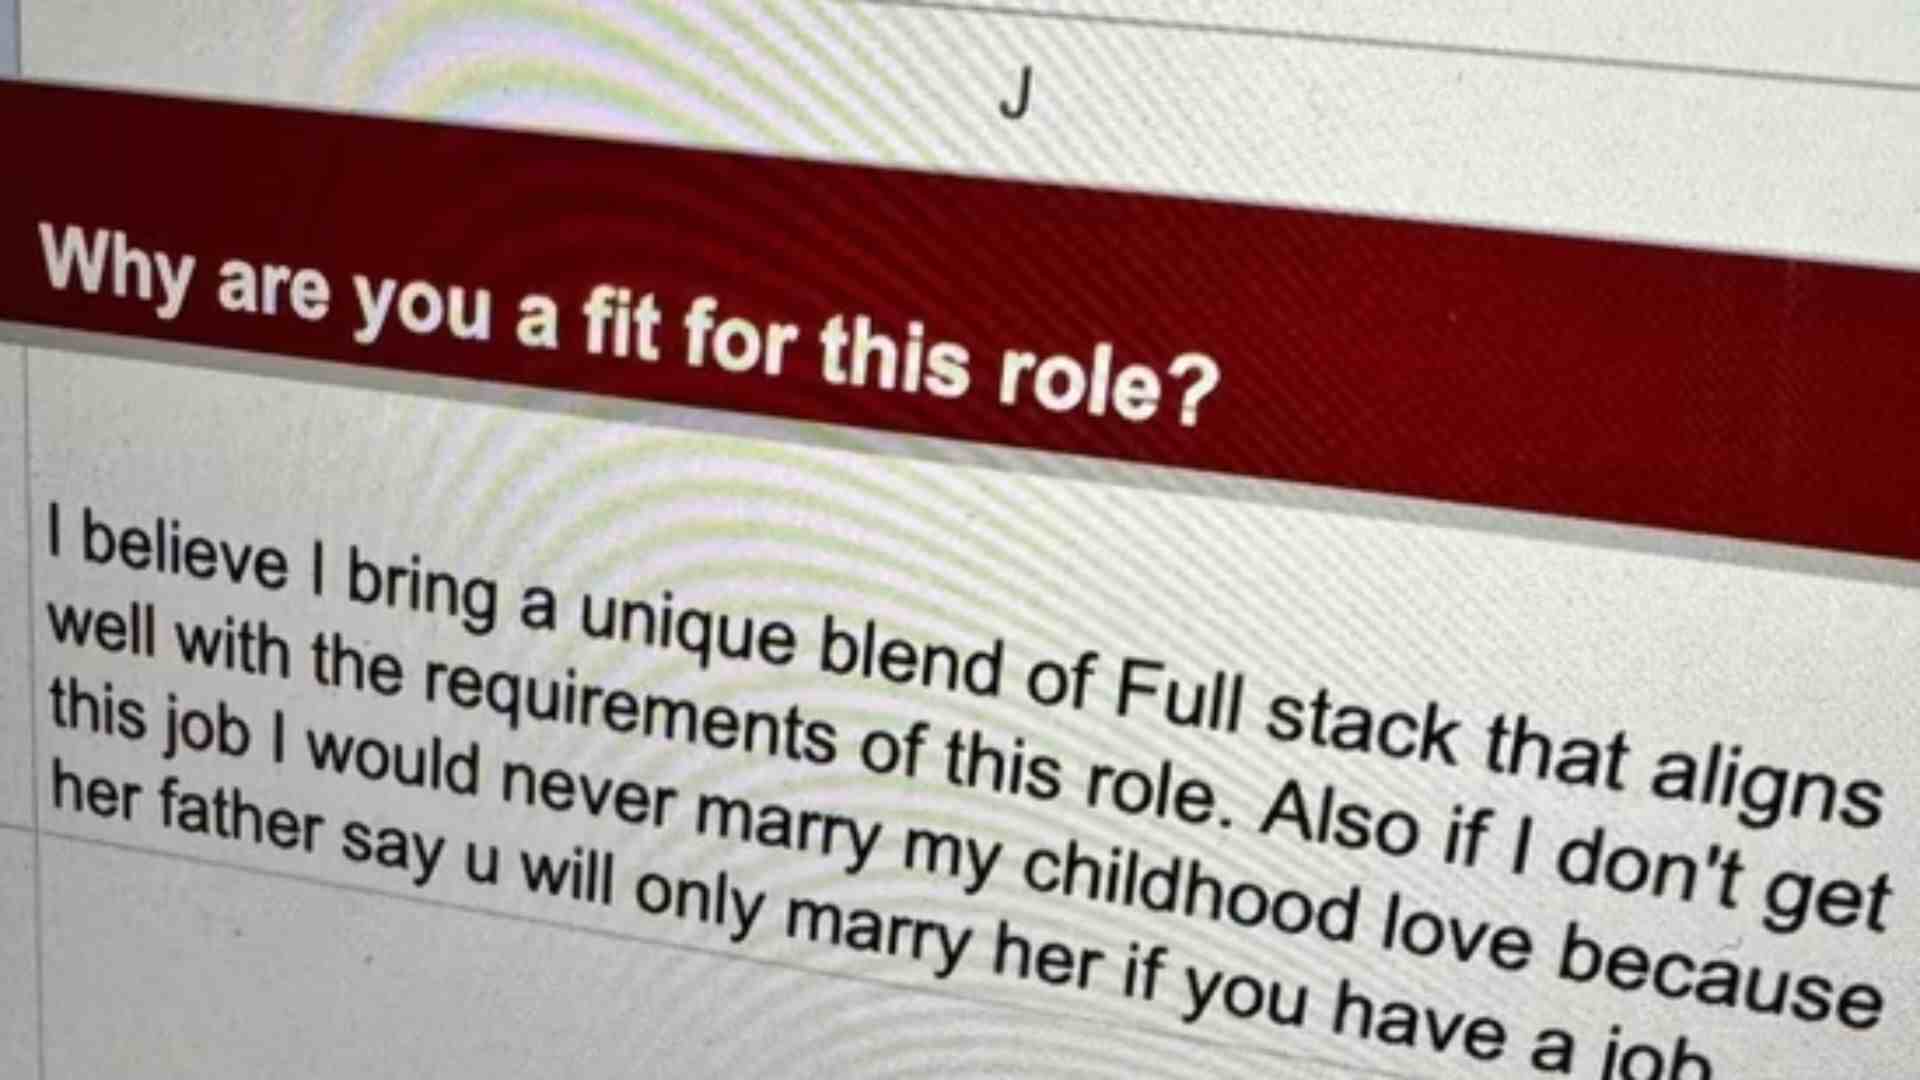 ‘If I Don’t Get This Job I Would Never Marry My Childhood Love…’ Job-Seeker’s ‘Honest’ Answer In Hiring Form